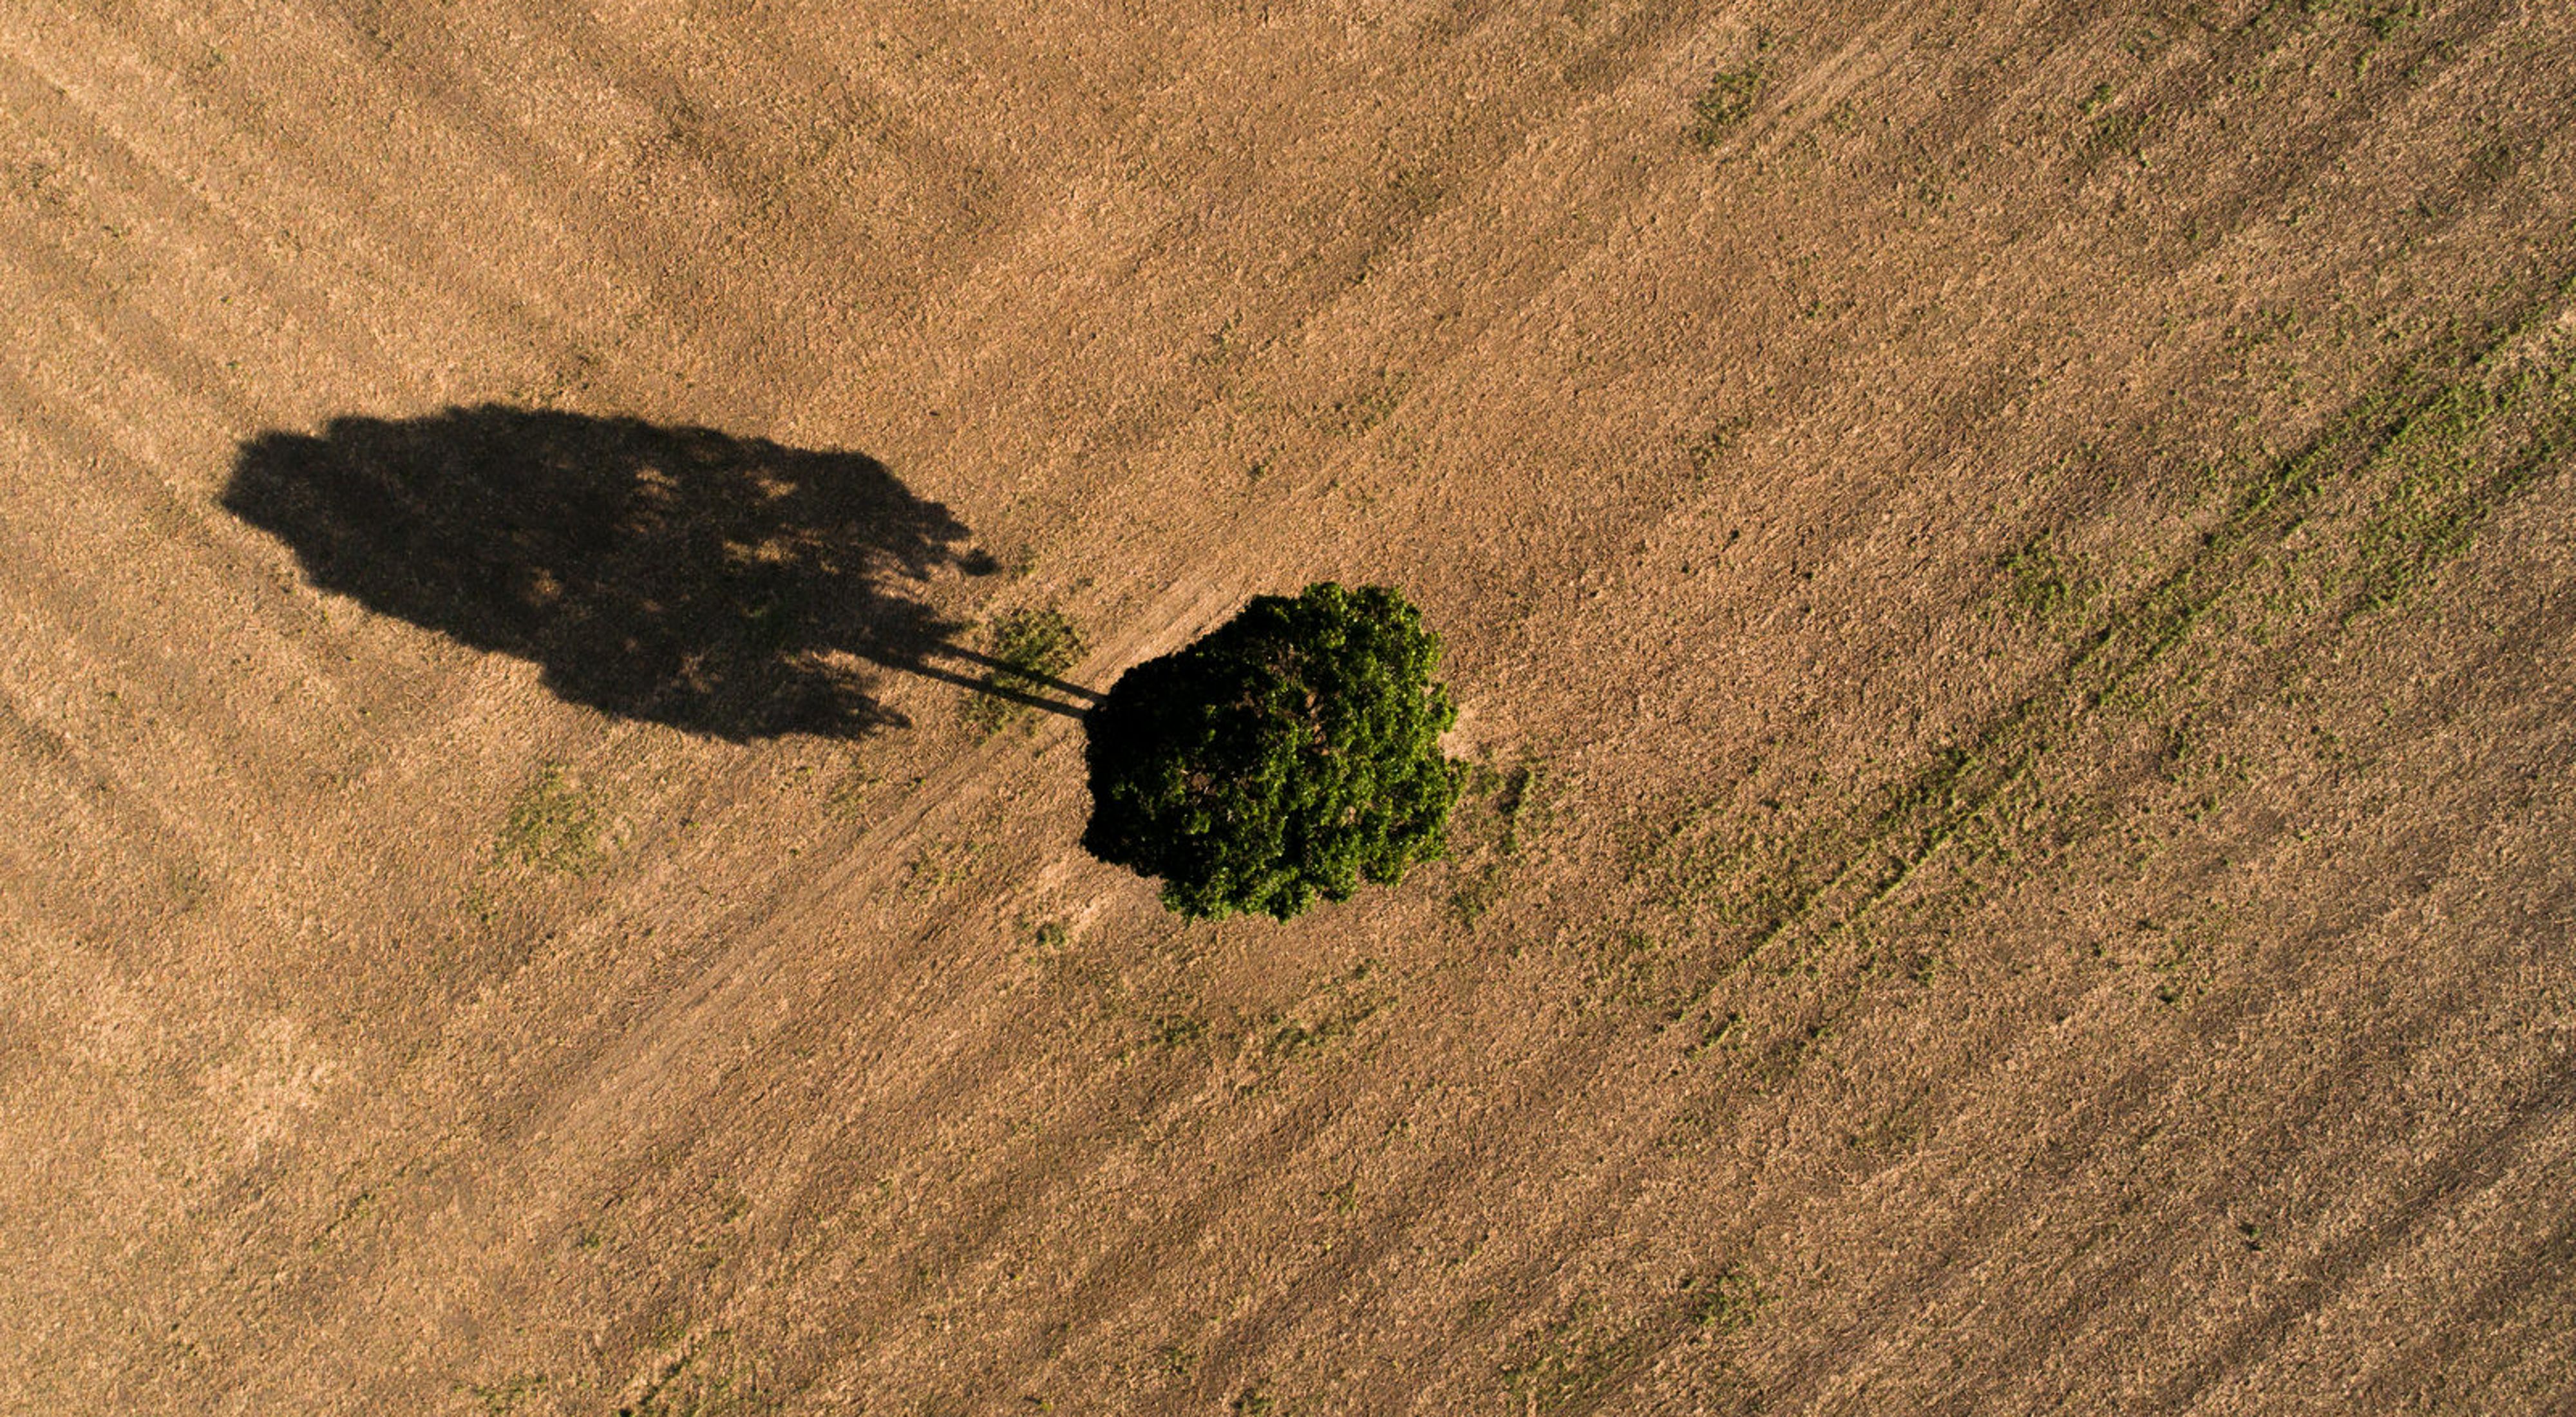 Aerial view of a lone tree in a soybean field.